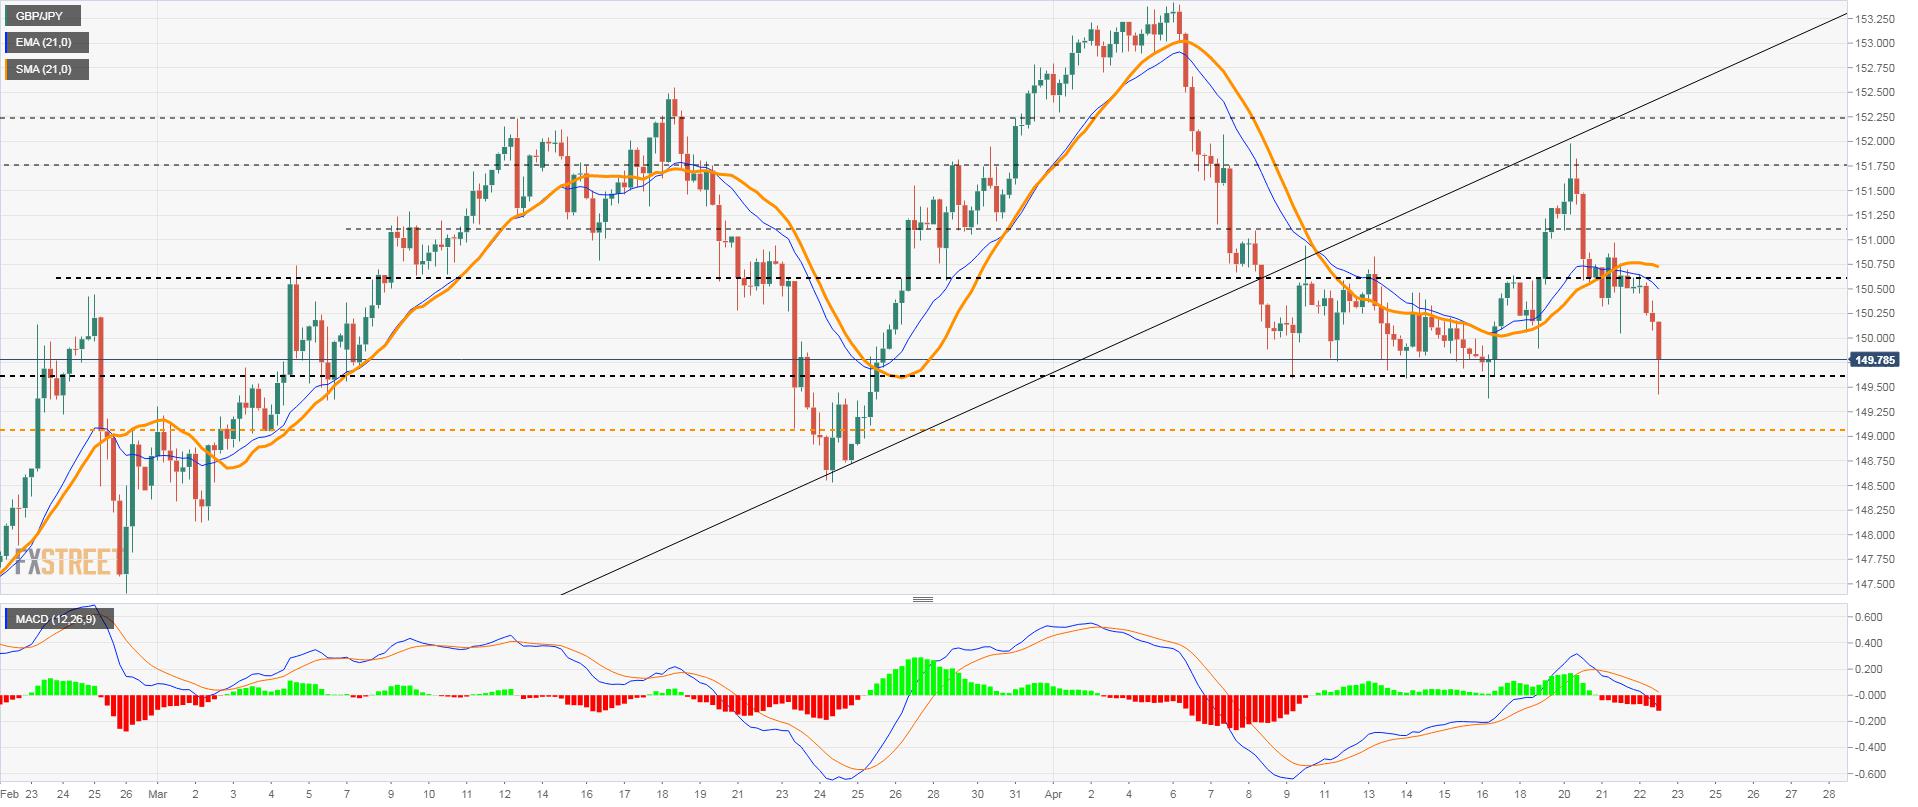 GBP/JPY Price Analysis: Bearish correction looking to extend under 149.50